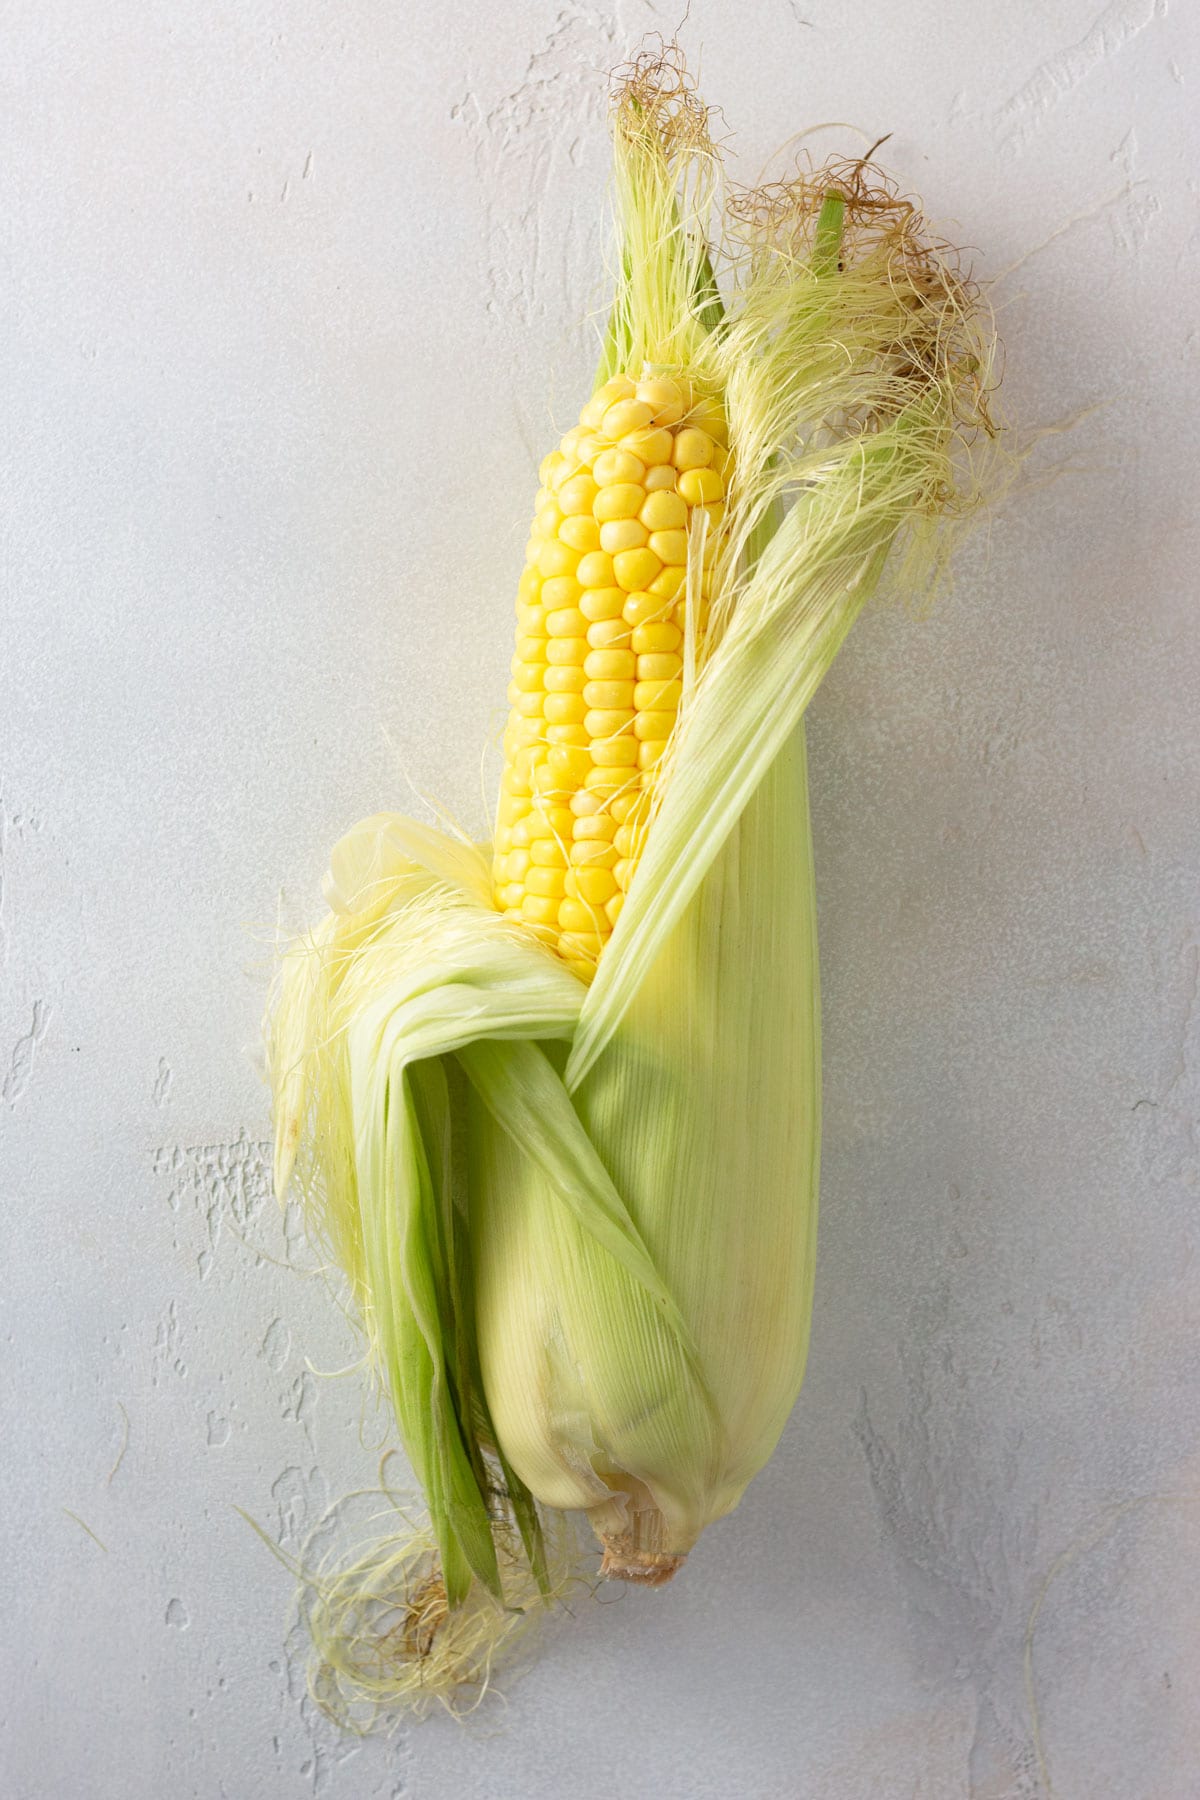 Overhead view of an ear of corn with the husk peeled partly down.